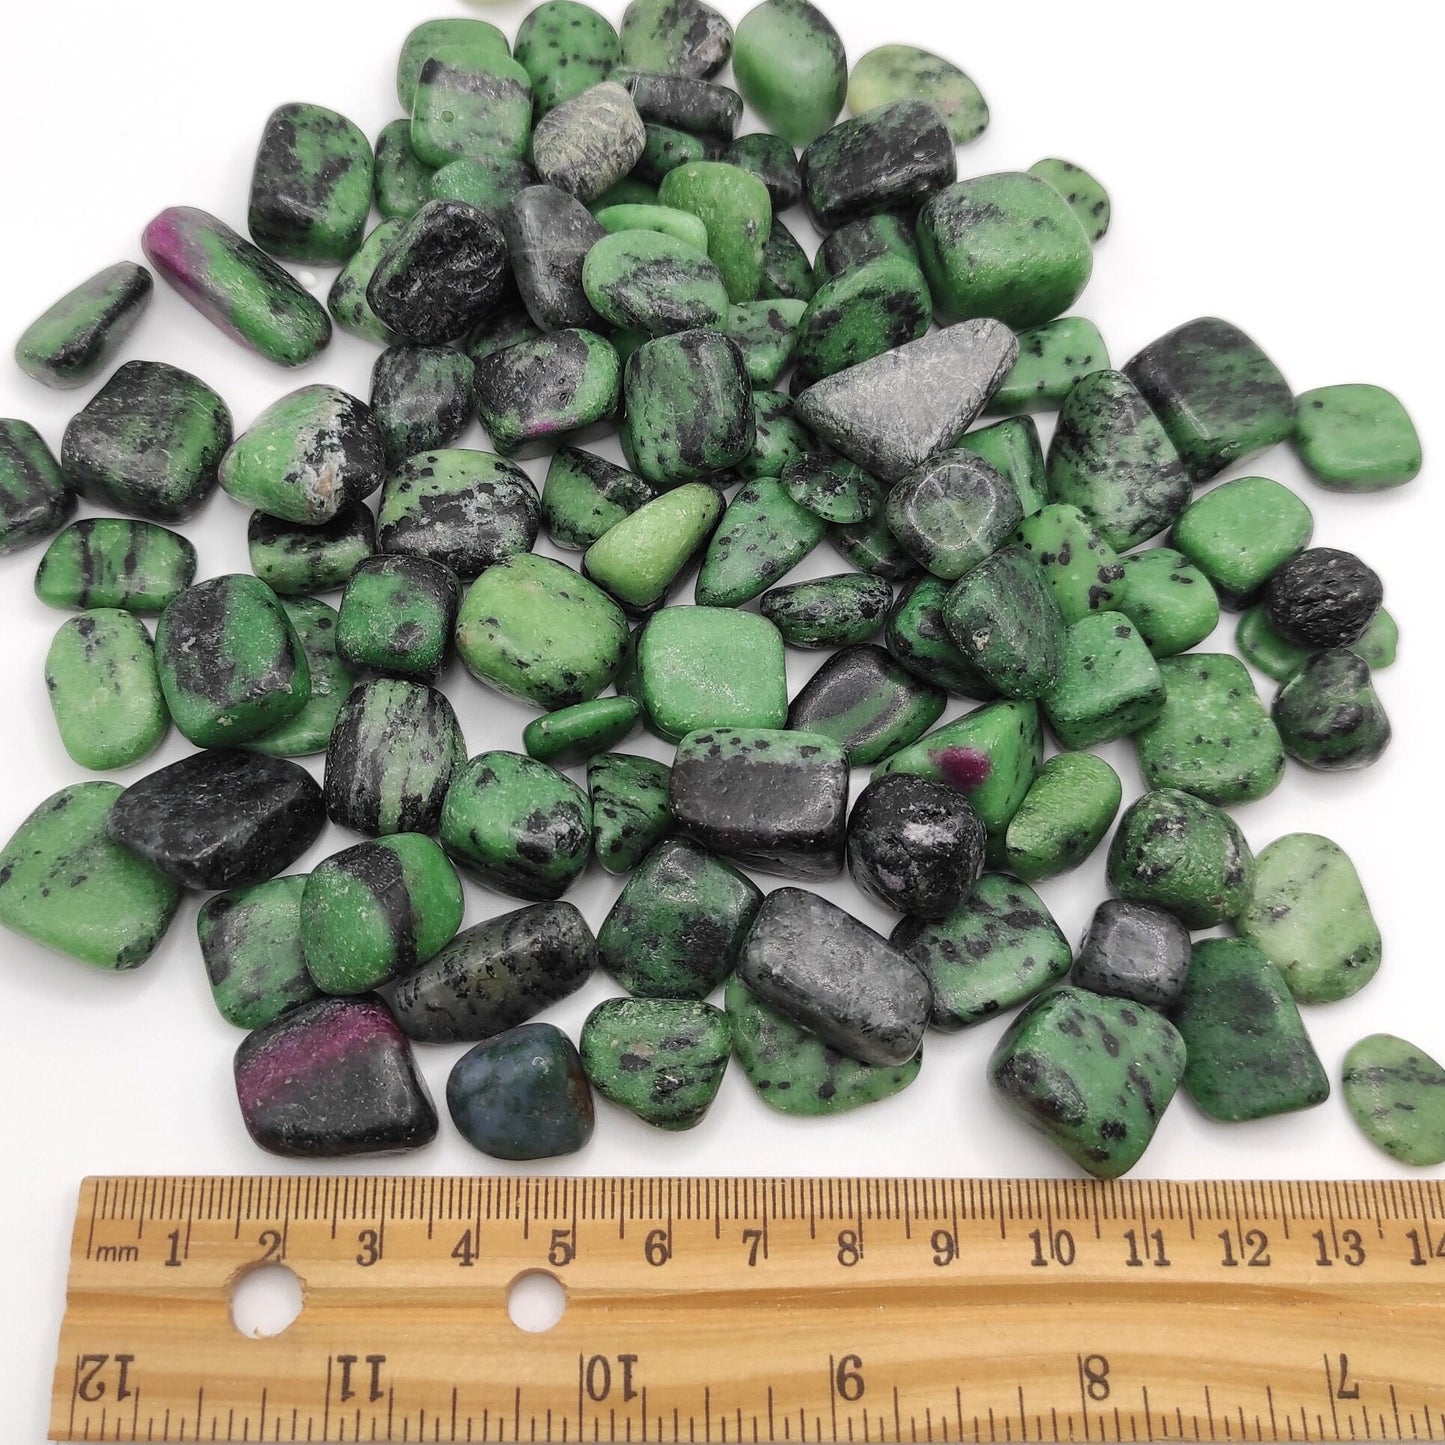 480g Zoisite with Ruby Tumbles - Bulk Lot of Polished Stones - Ruby Zoisite from India - Tumbles Crystals